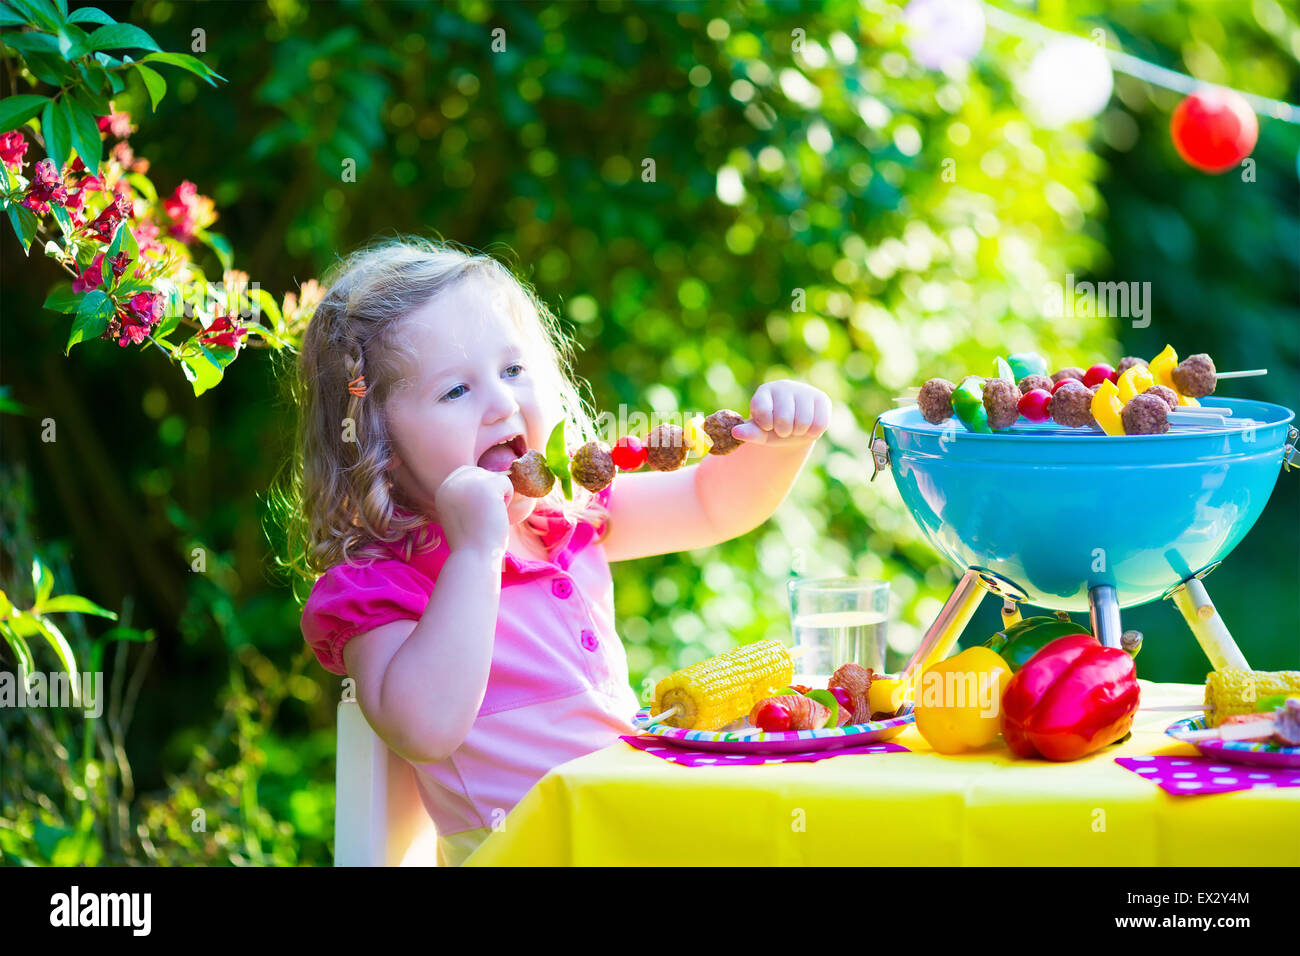 Children grilling meat. Family camping and enjoying BBQ. Little girl at barbecue preparing steaks, kebab and corn. Stock Photo